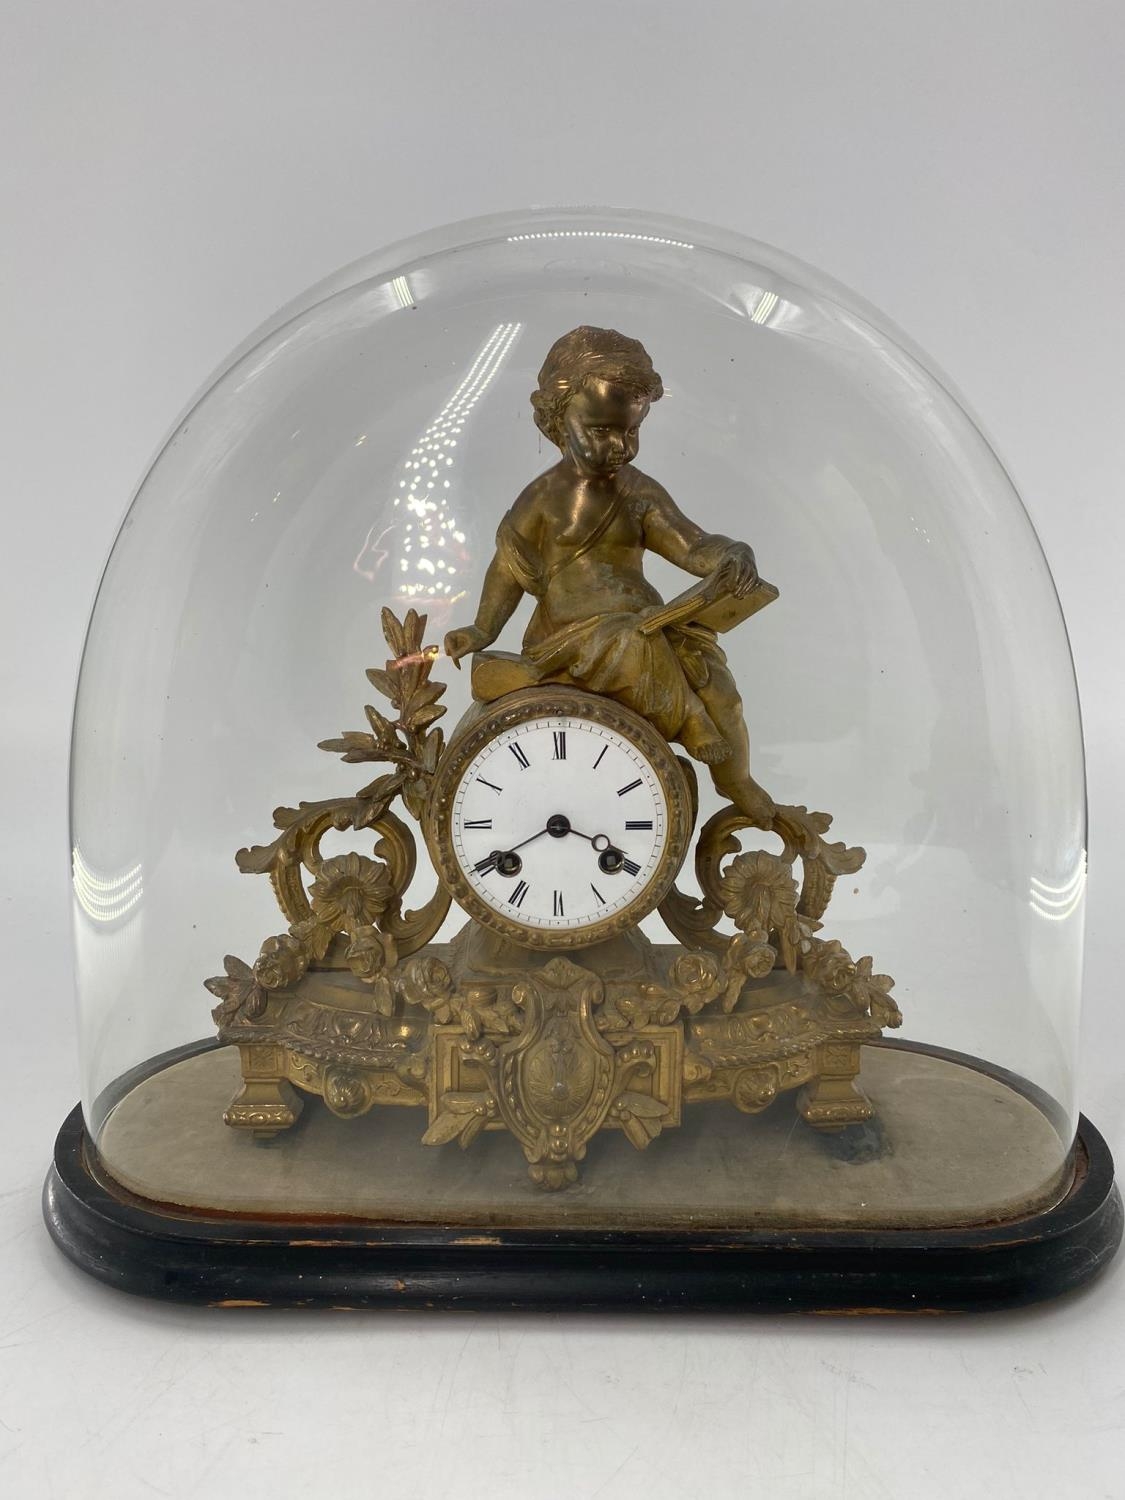 French gilt mantle clock, surmounted by Cherbub figure reading a book, in a glass dome - Image 2 of 5